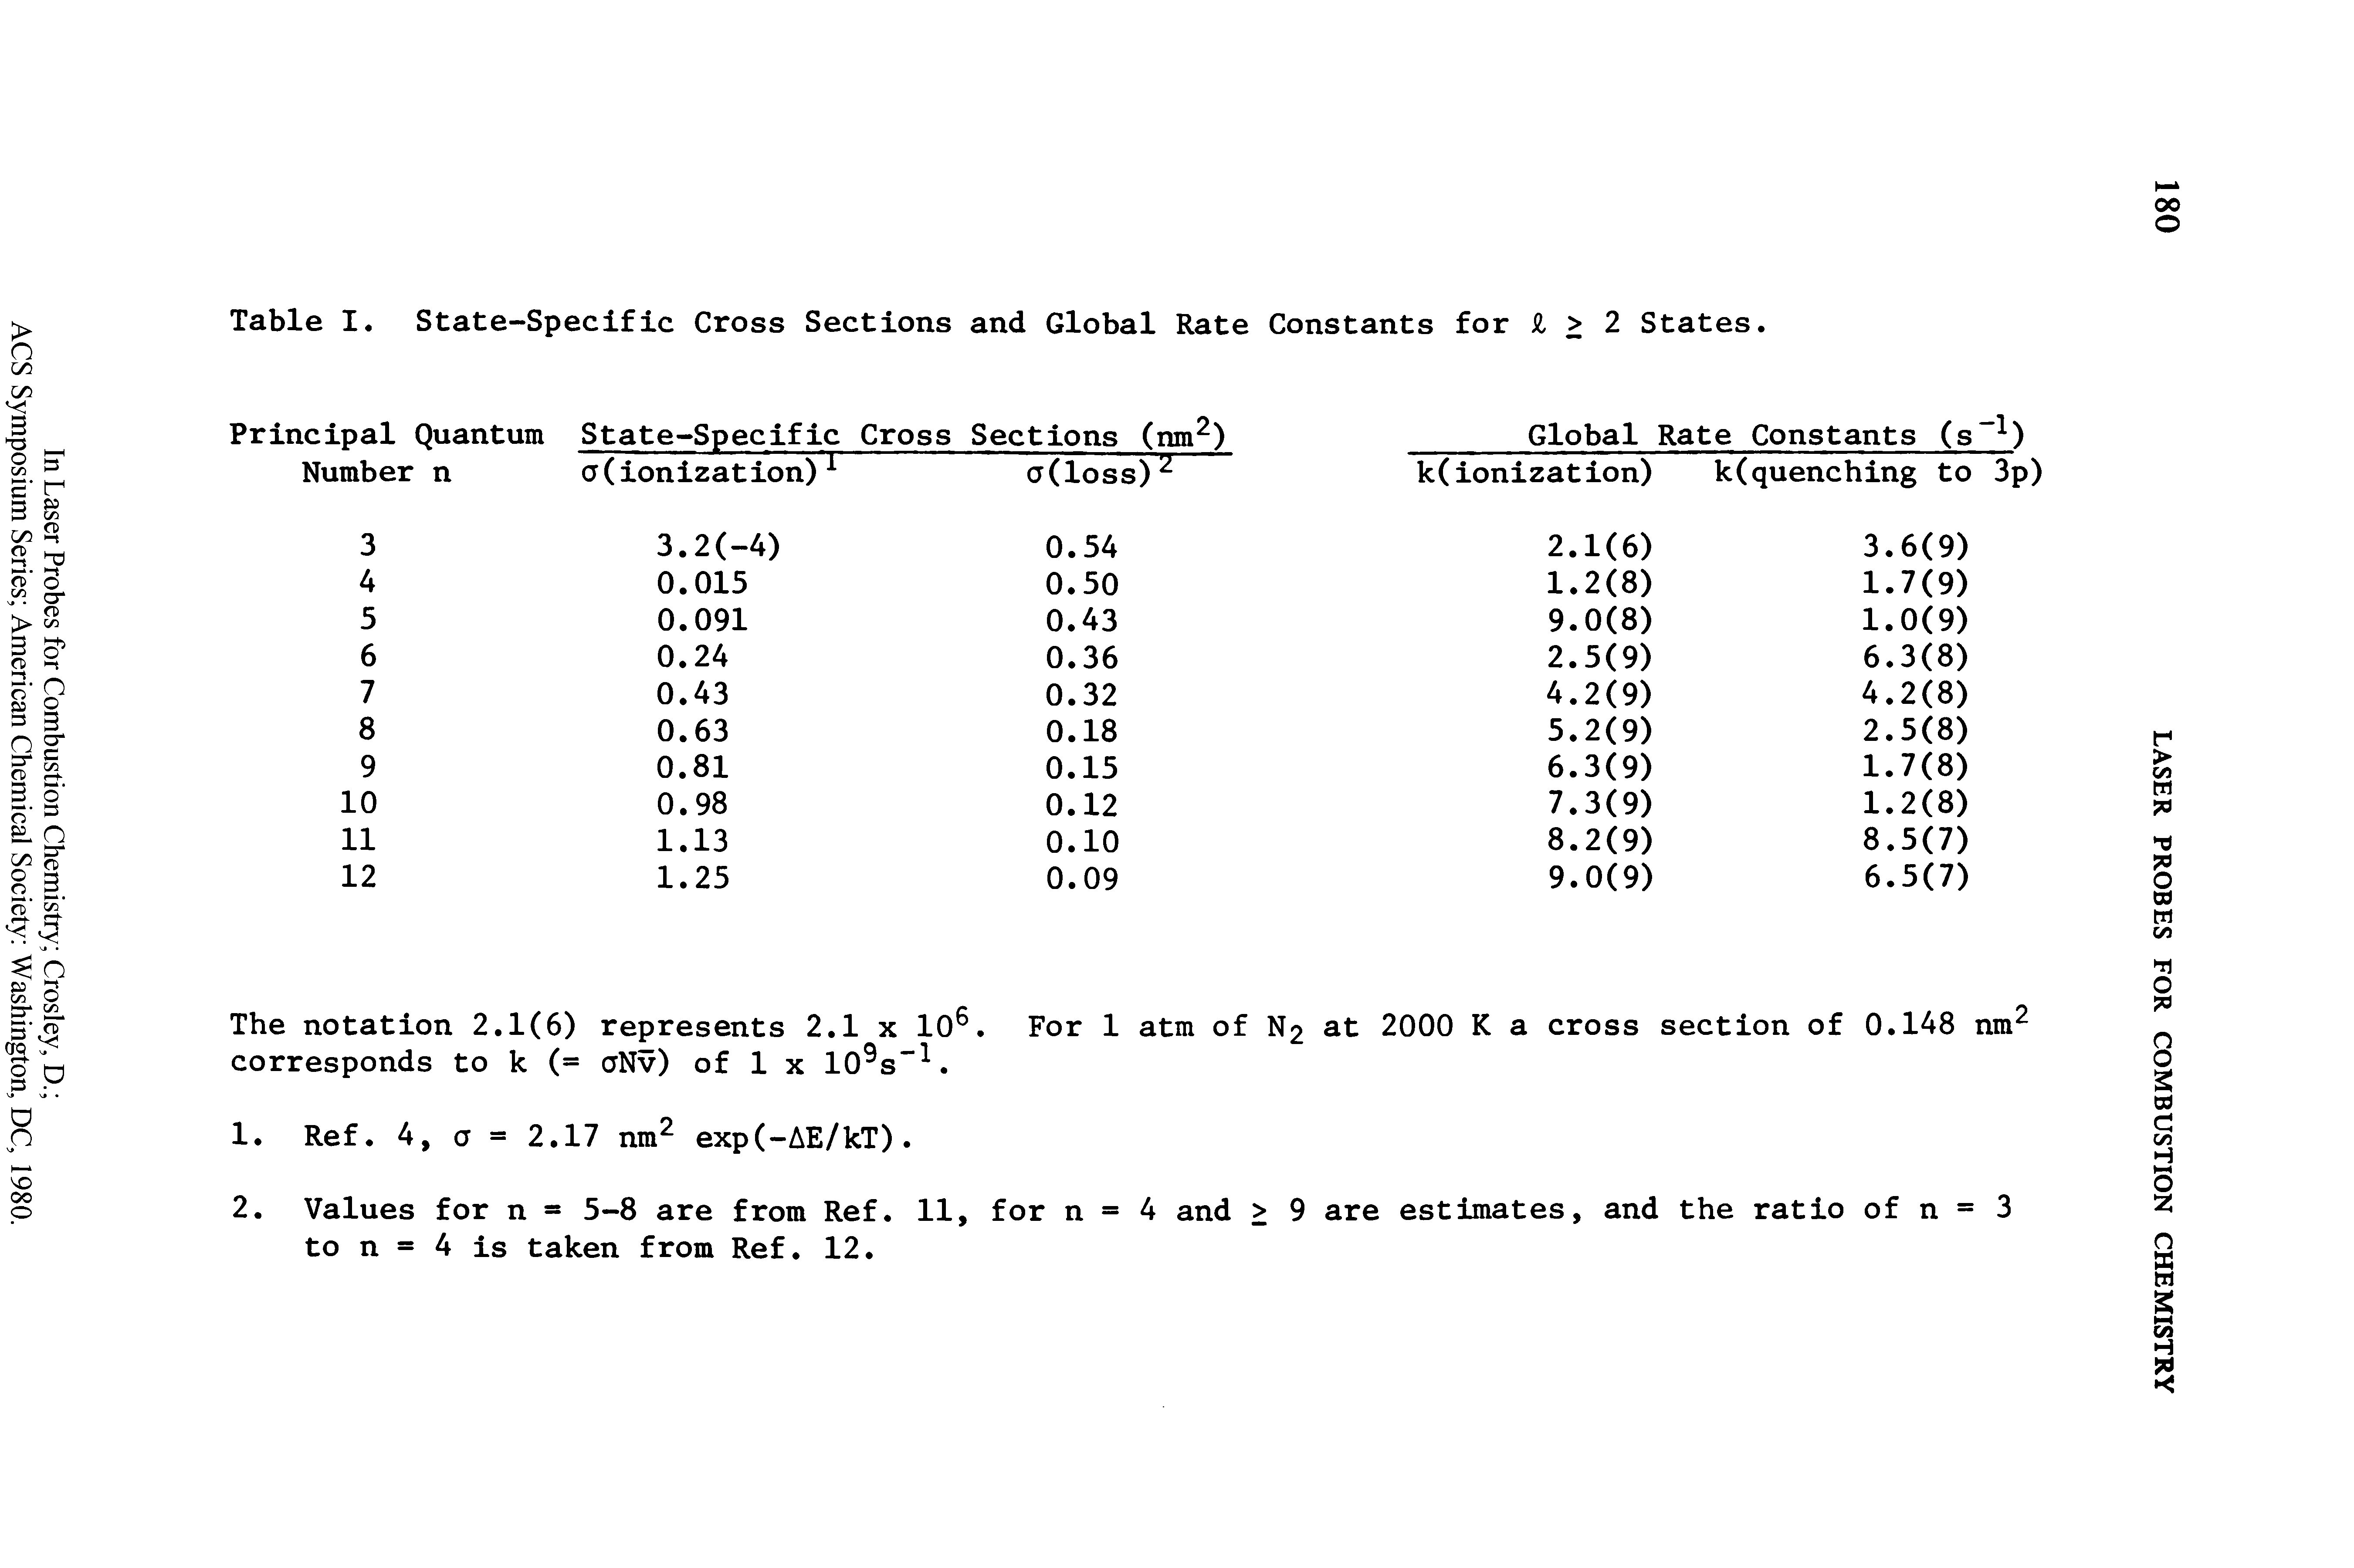 Table I. State-Specific Cross Sections and Global Rate Constants for i > 2 States.